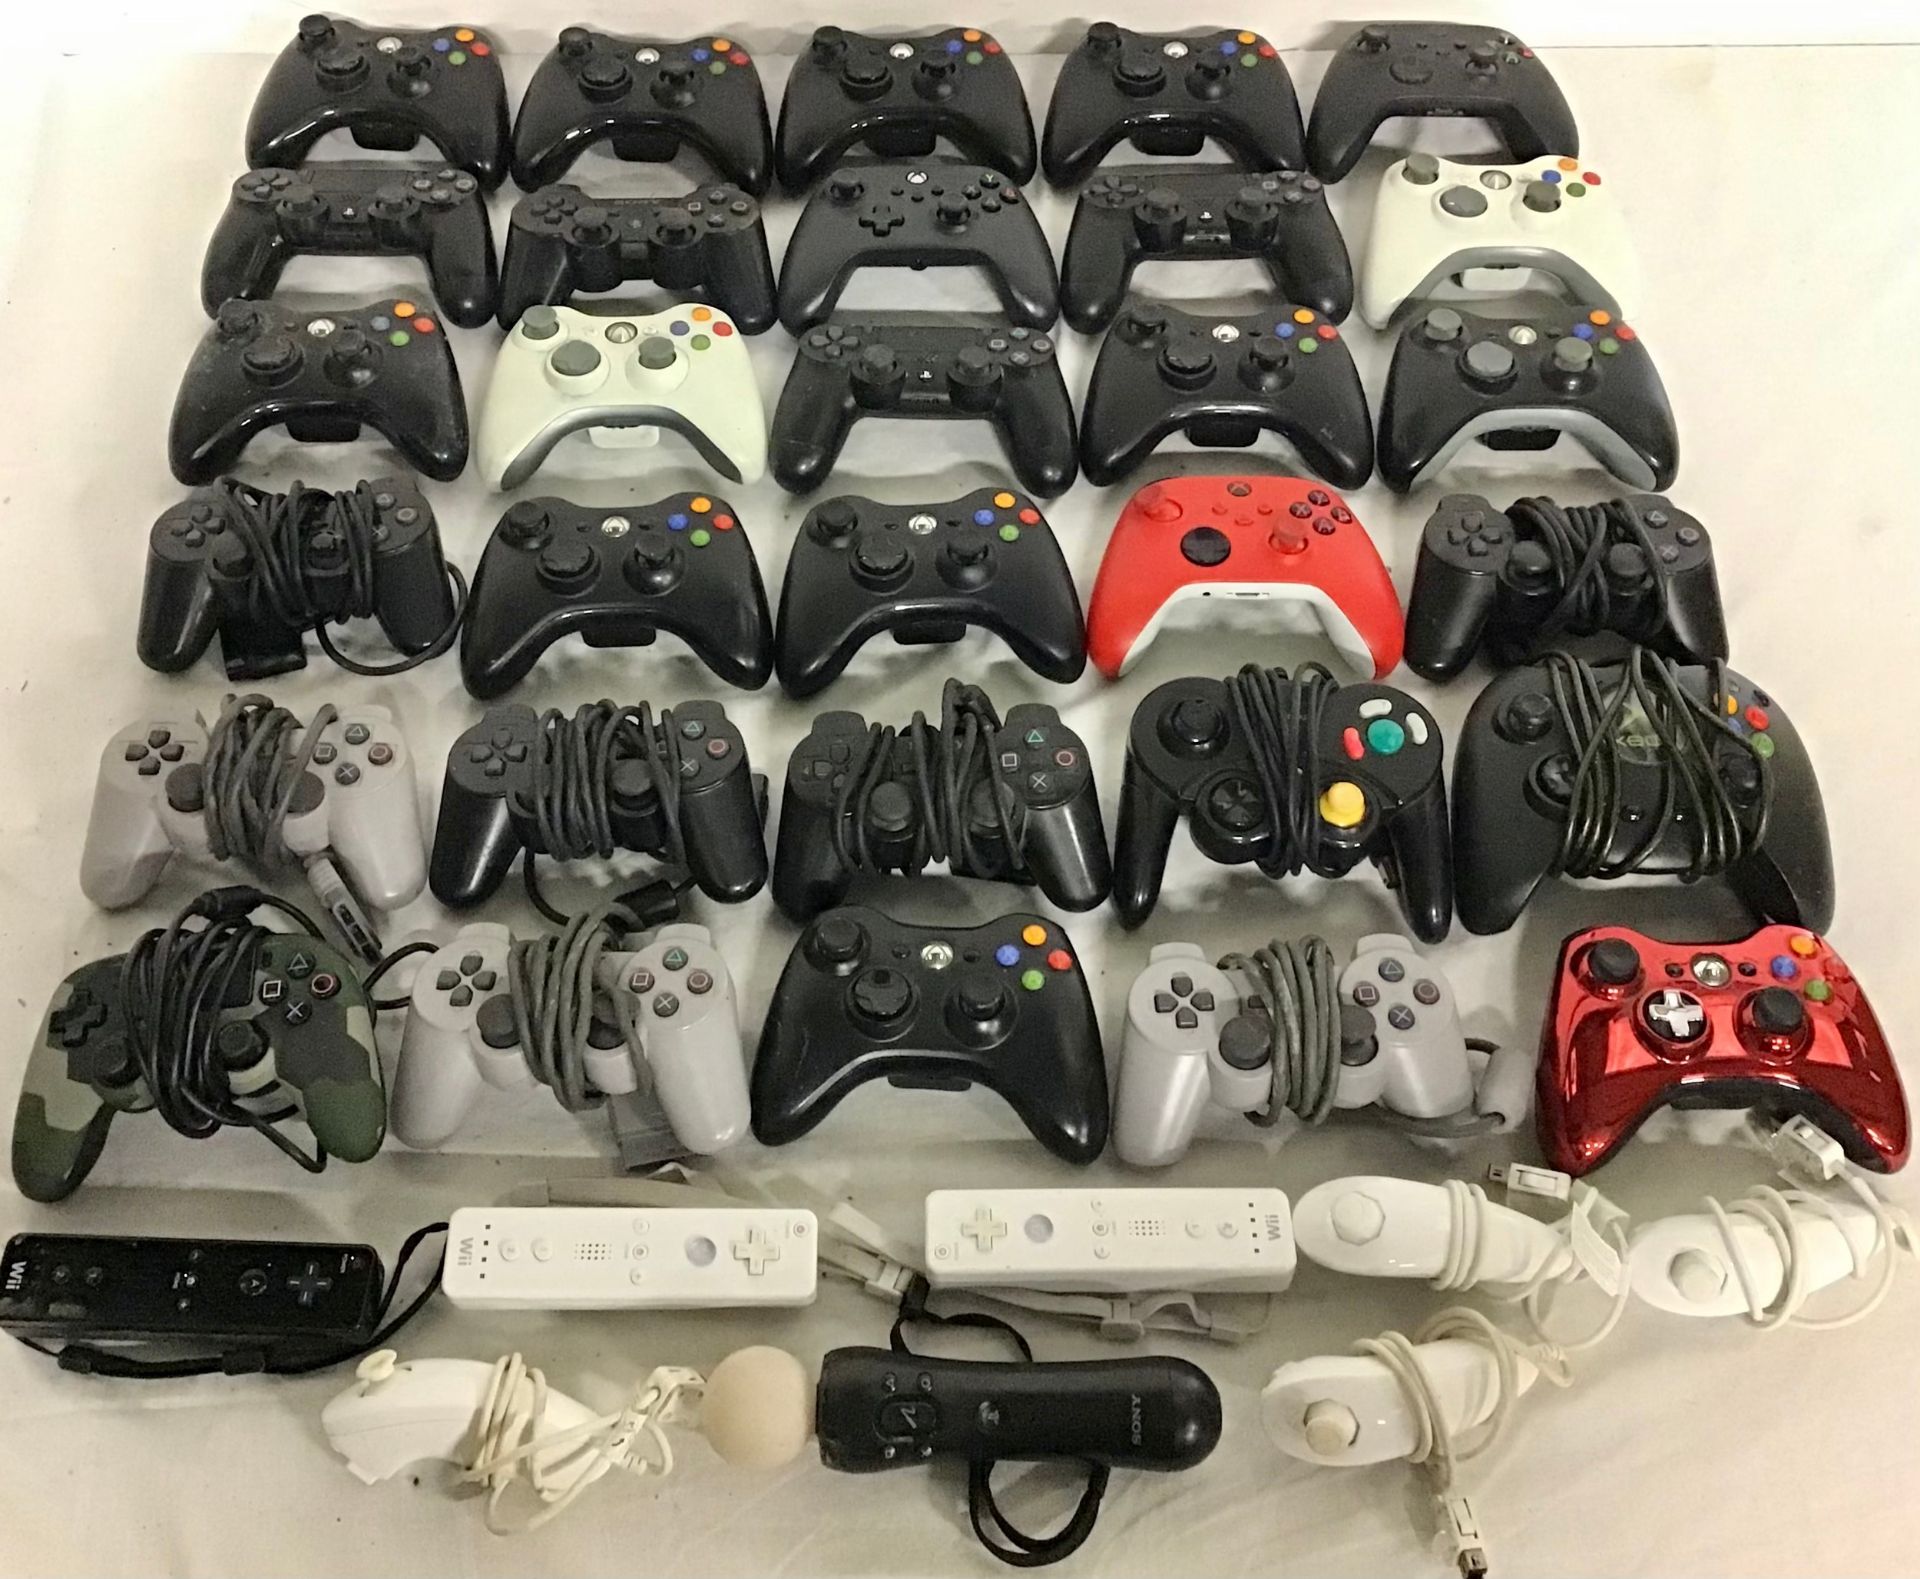 COLLECTION OF HAND HELD GAMING DEVICES. To include makes - Xbox - Wii - Sony etc. 38 in total.